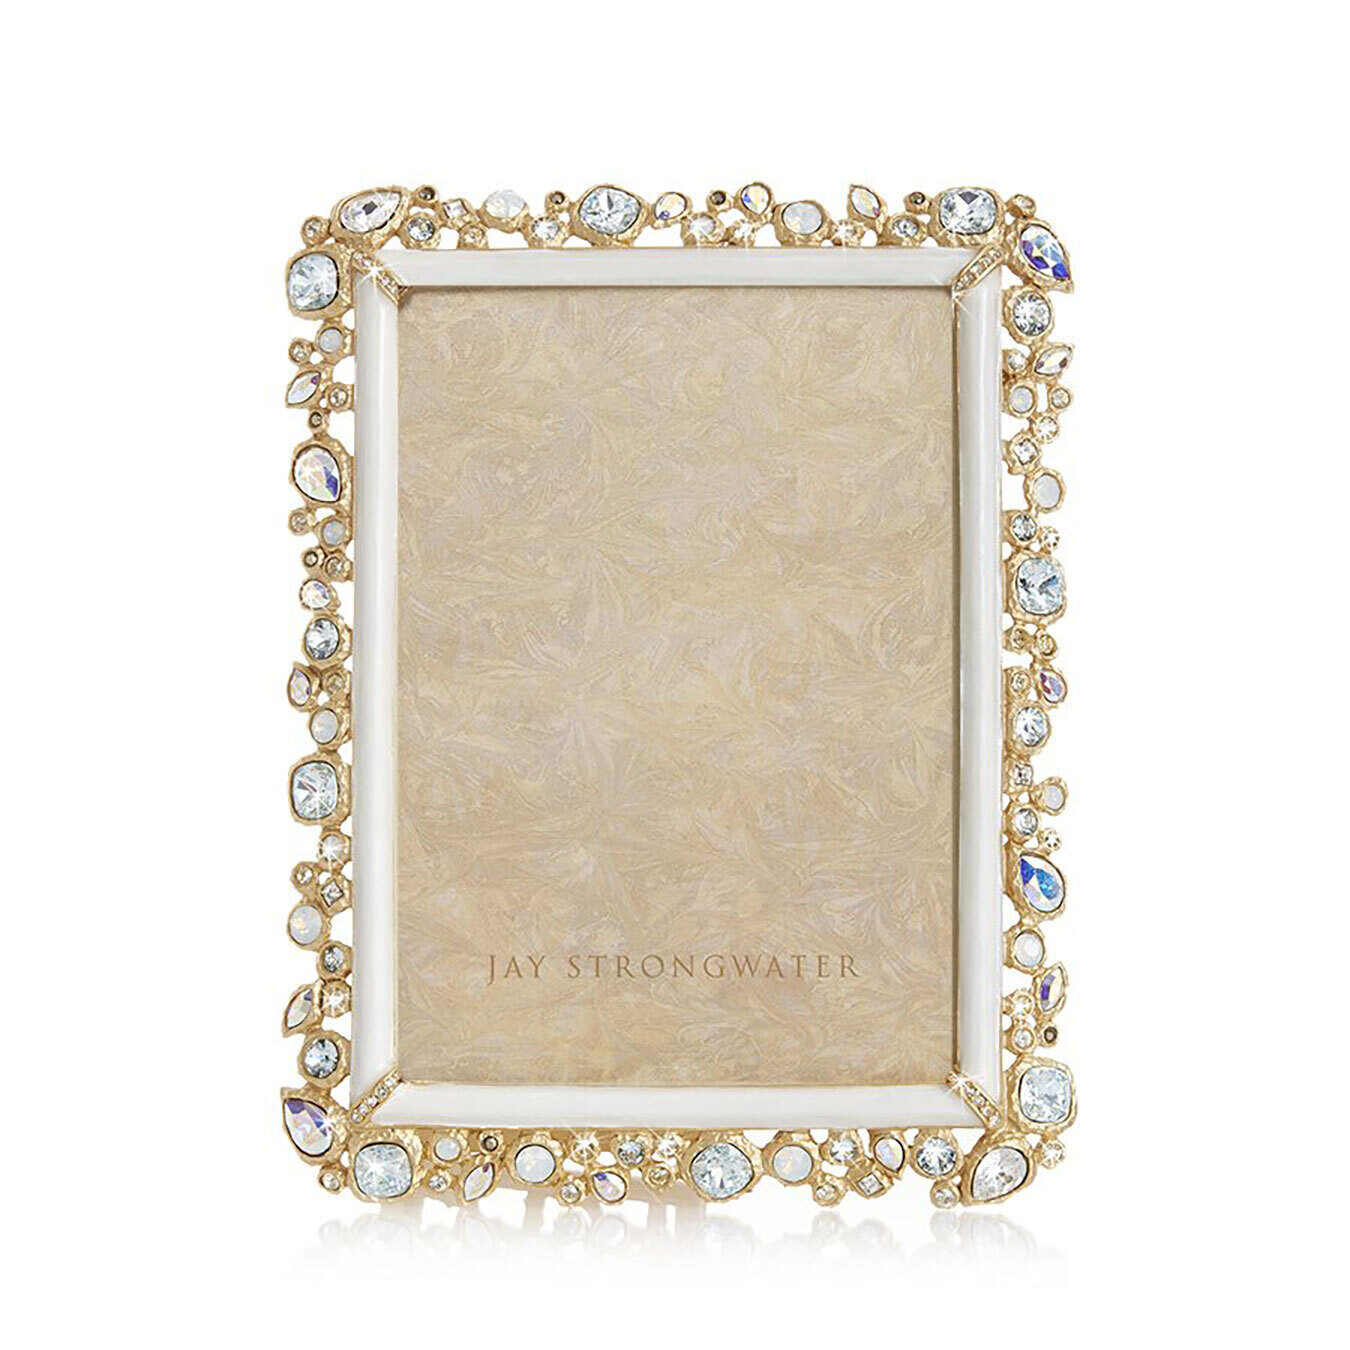 Jay Strongwater Bejeweled 5" x 7" Picture Frame SPF5844-219